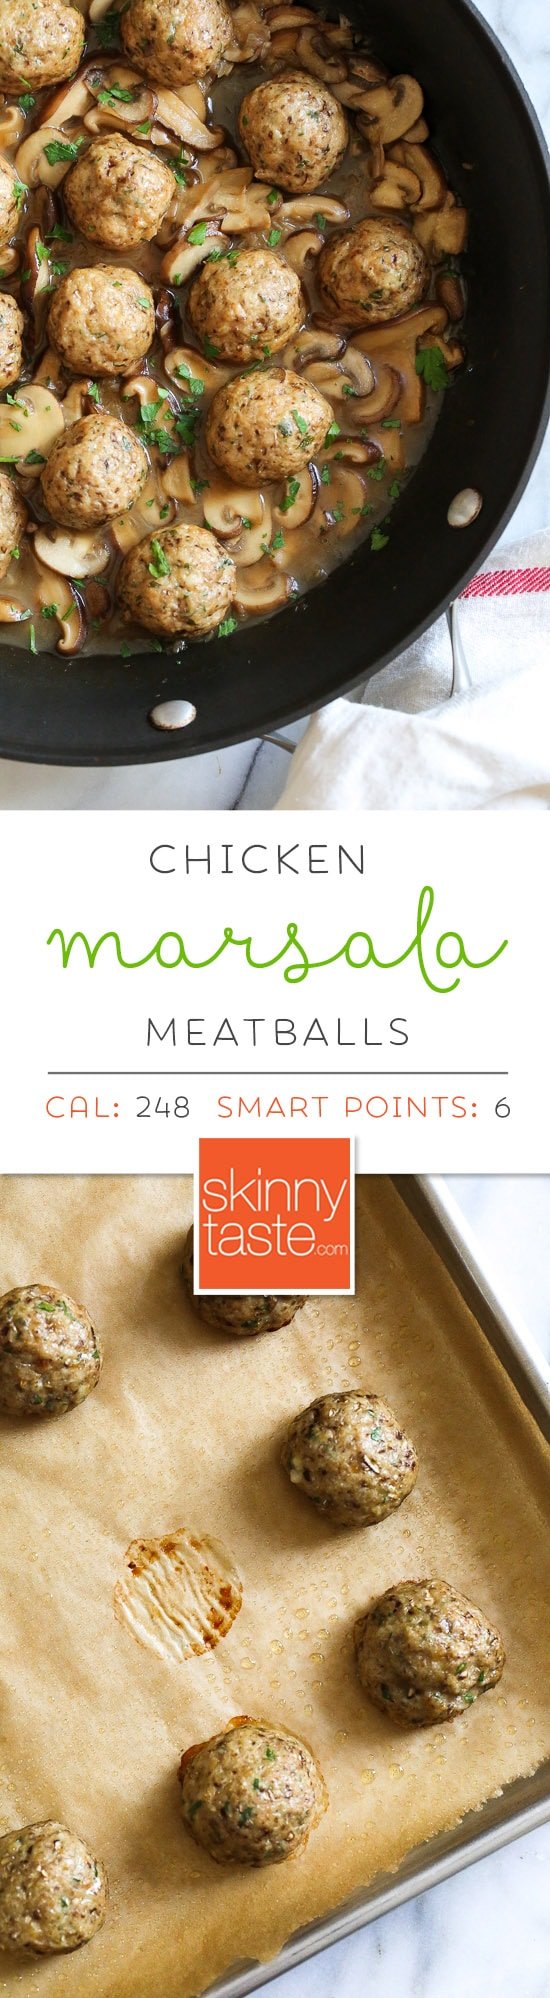 These Chicken Marsala Meatballs are a fun twist in the classic dish! Great served over butternut squash or egg noodles. #chickenmarsala #chickenmeatballs #weightwatchermeatballs #weightwatcherrecipes #recipe #chickenmarsalameatballs #glutenfree #kidfriendlydinner #easychickenrecipe